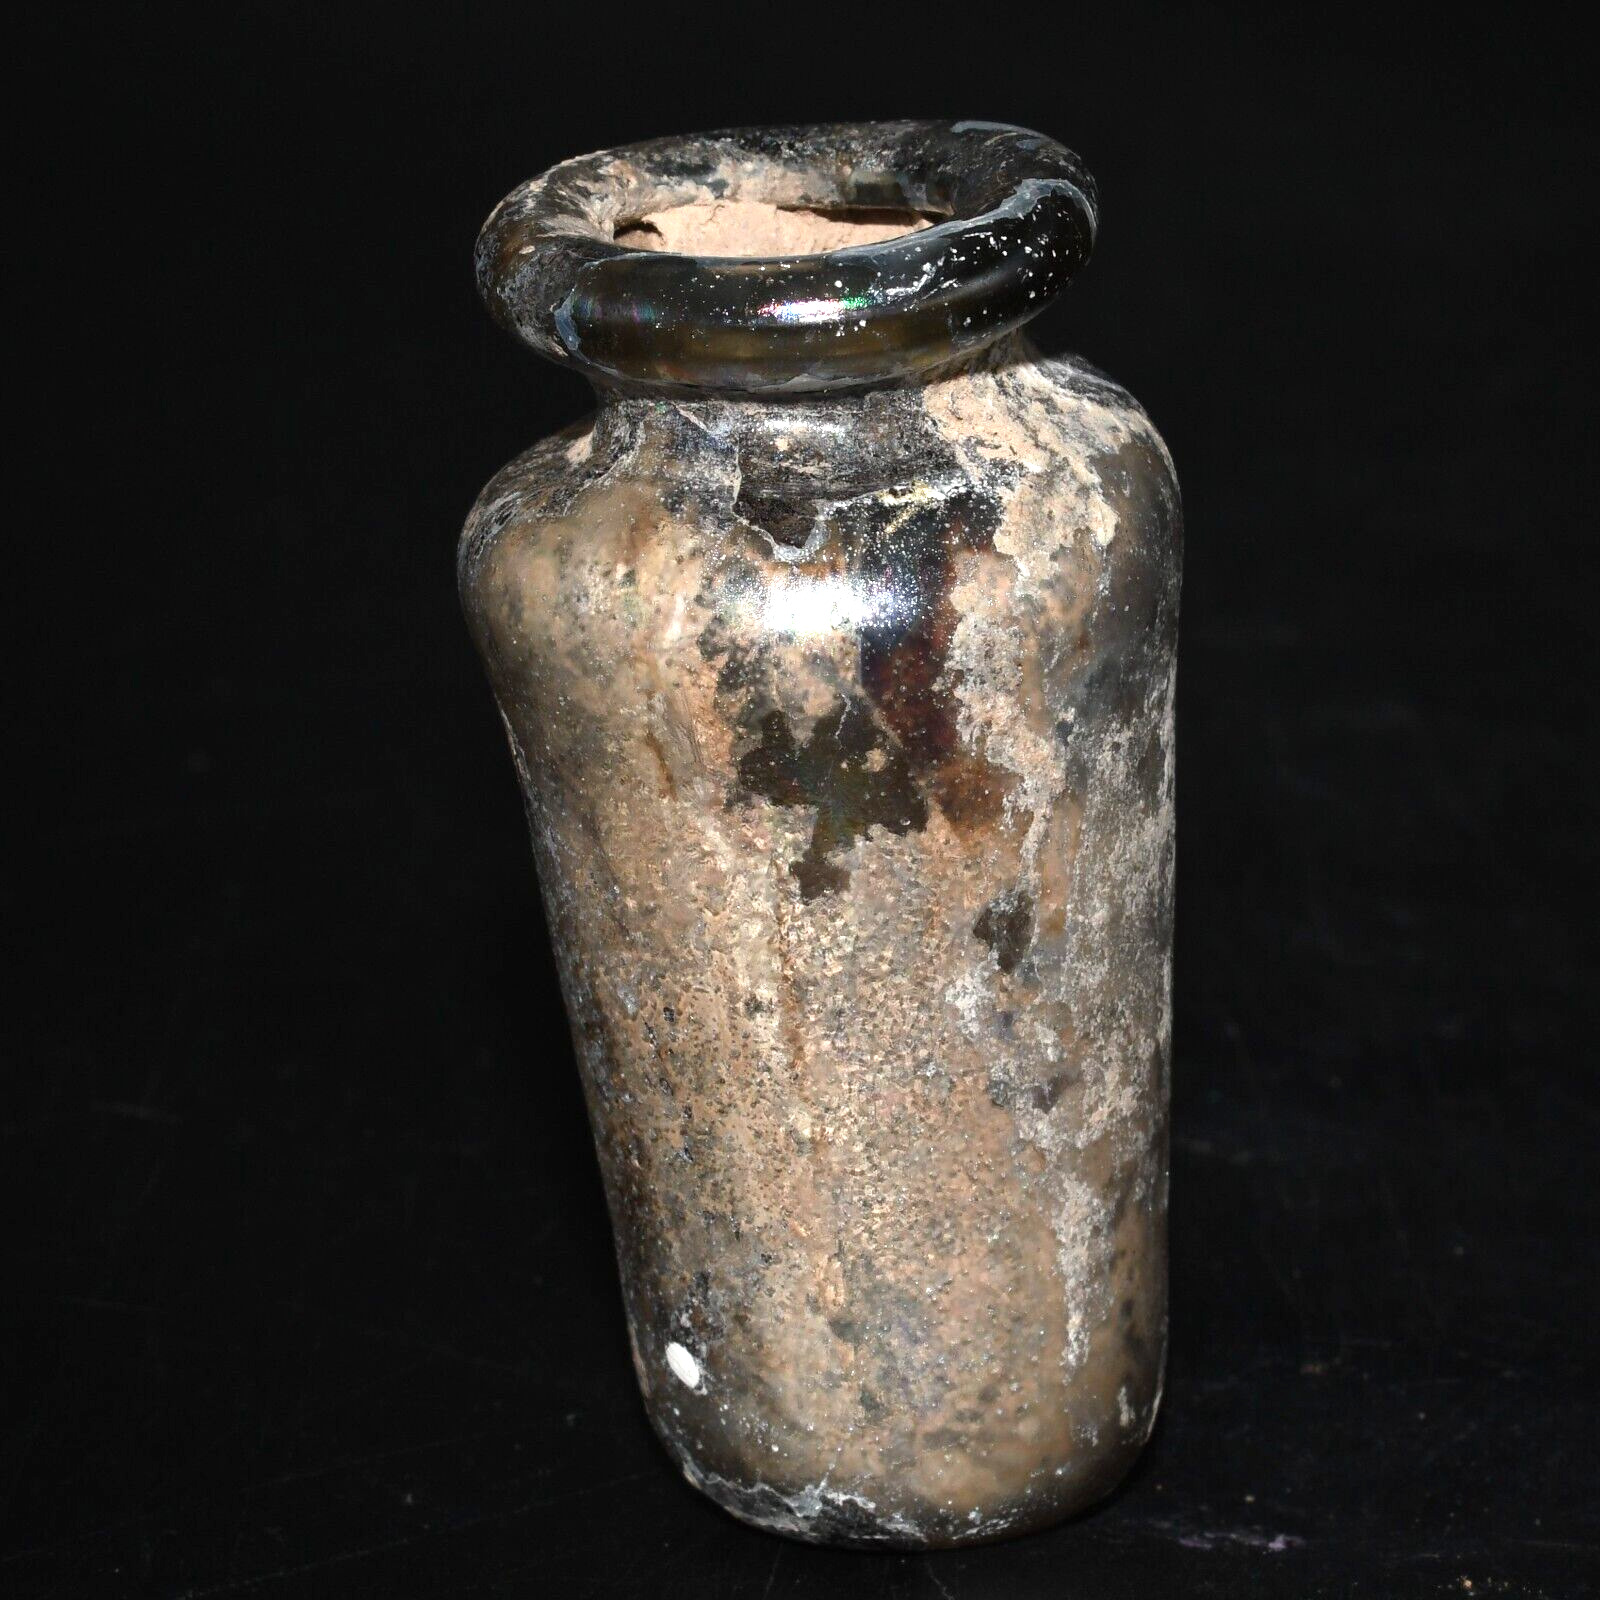 Authentic Intact Ancient Roman Glass Bottle in Perfect Condition 2nd Century AD